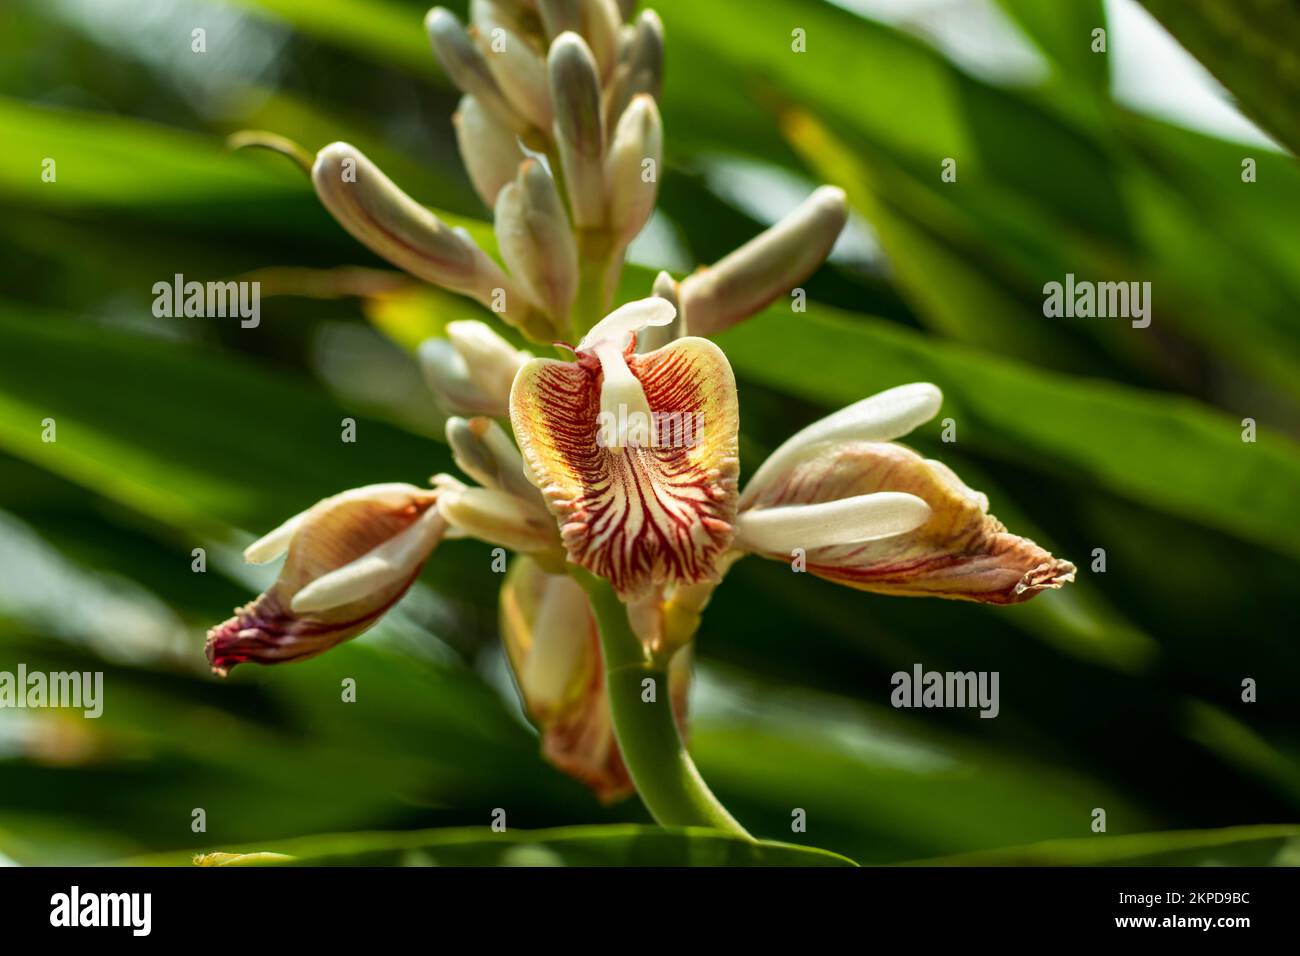 Elettaria cardamomum, or elachi flower commonly known as green or true cardamom, is a herbaceous, perennial plant in the ginger family, native to sout Stock Photo